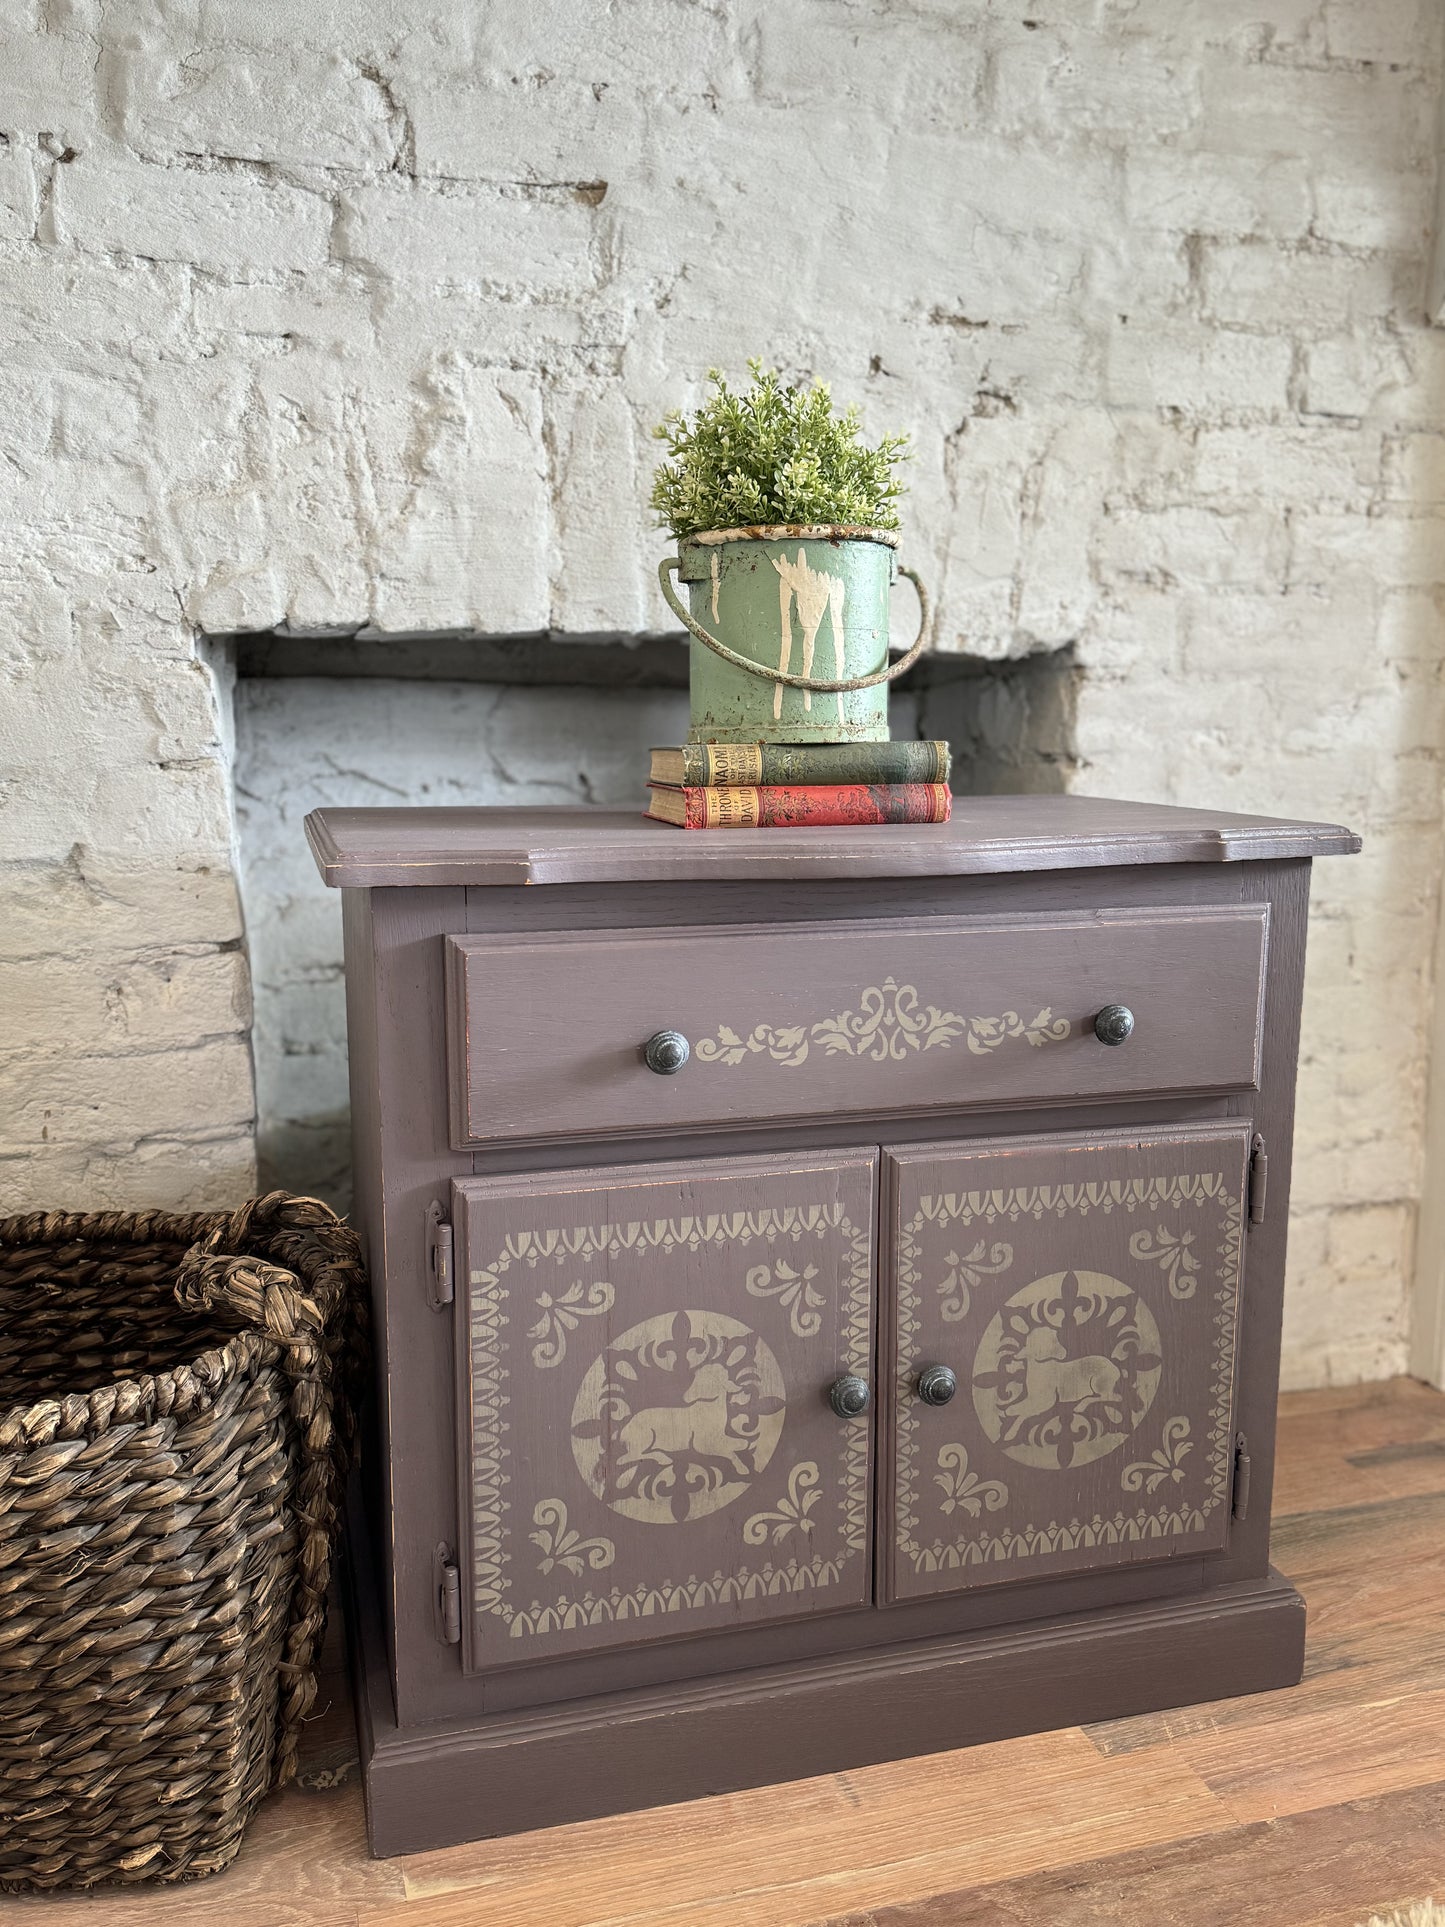 Plum Pudding | DIY Cottage Color One Step Paint Curated by Jami Ray Vintage